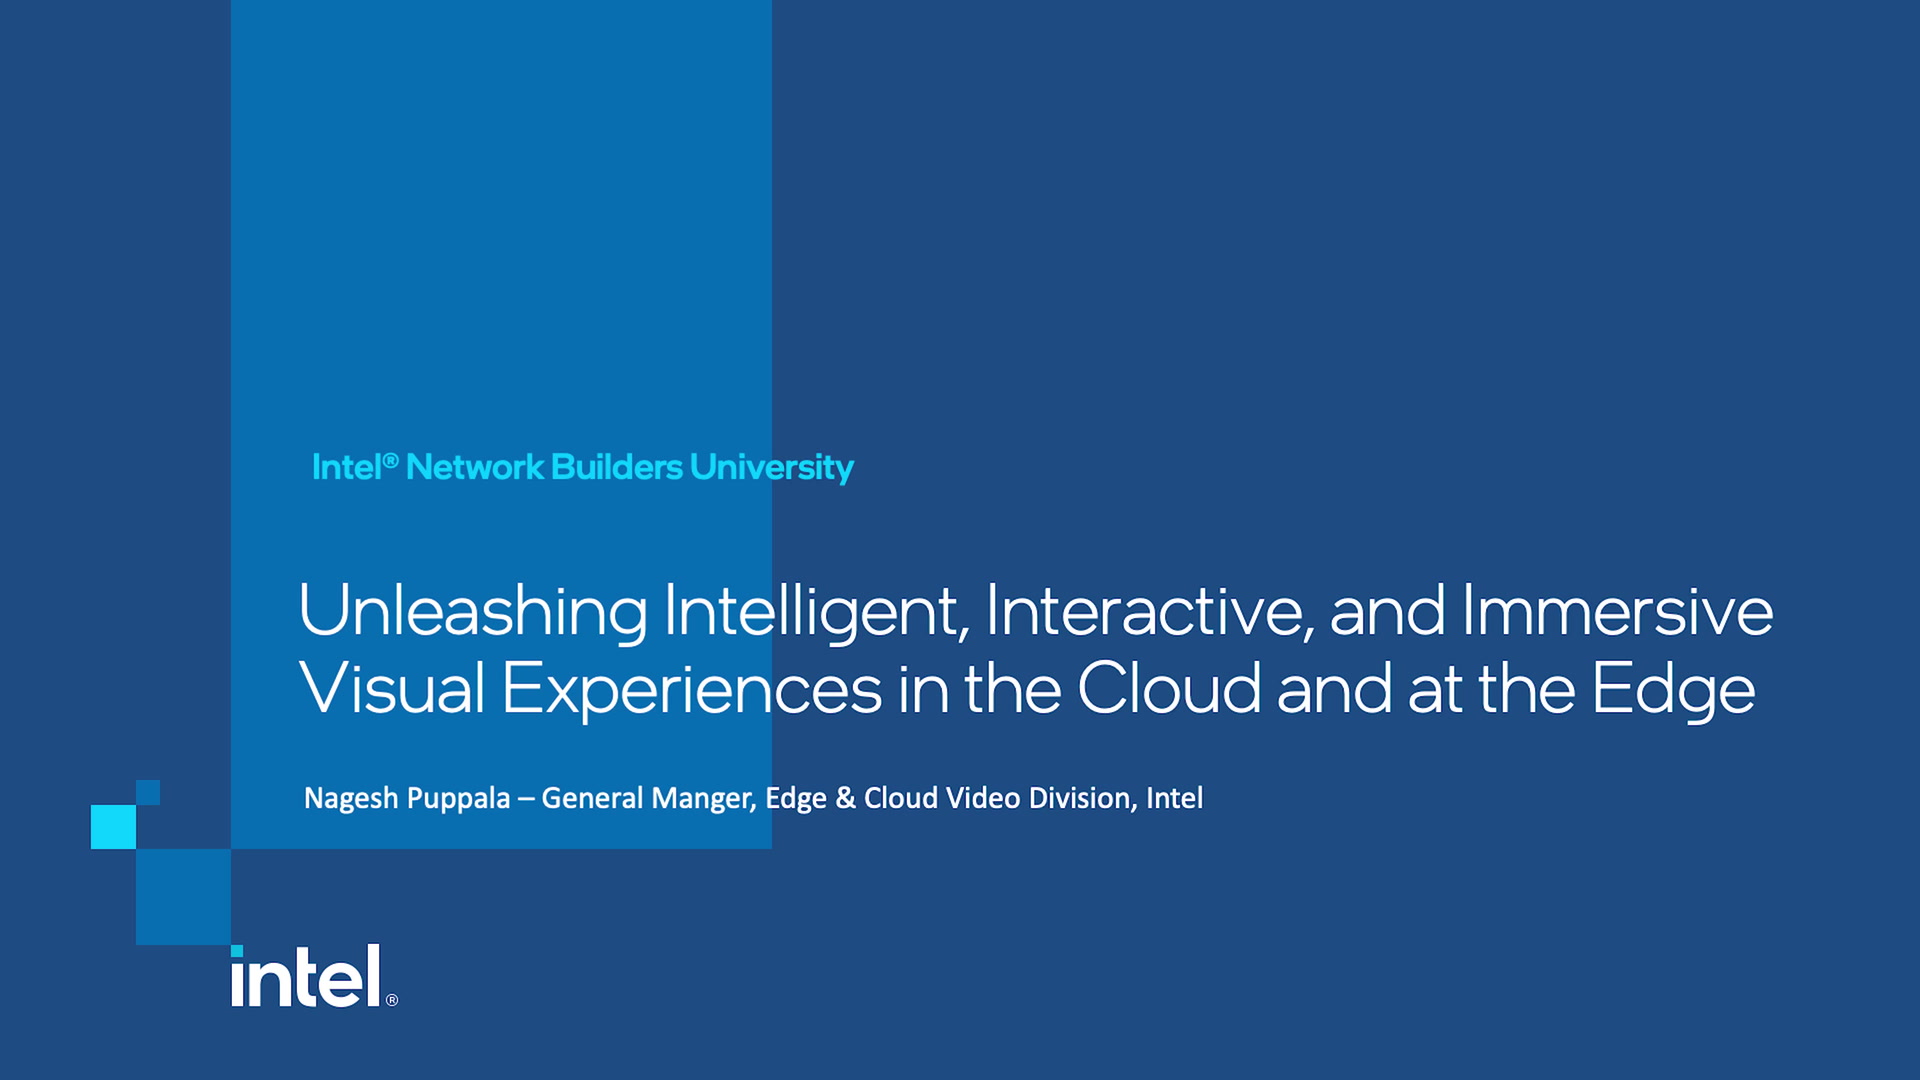 Unleashing Intelligent, Interactive, and Immersive Visual Experiences in the Cloud and at the Edge